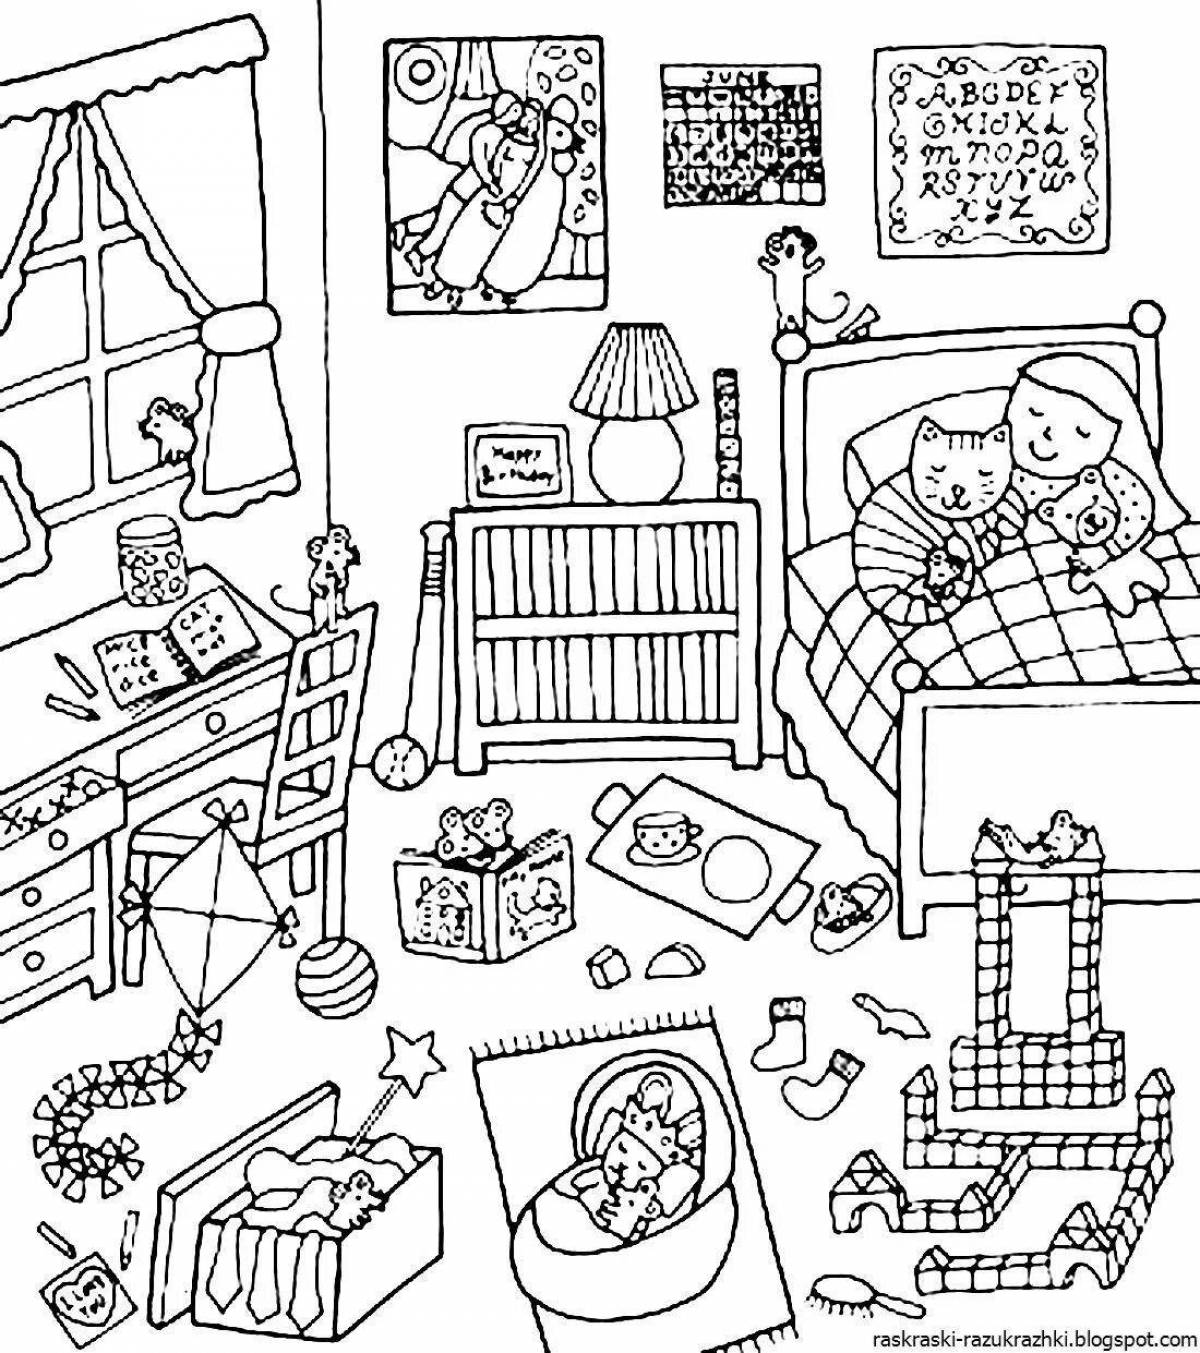 Colorful game room coloring page